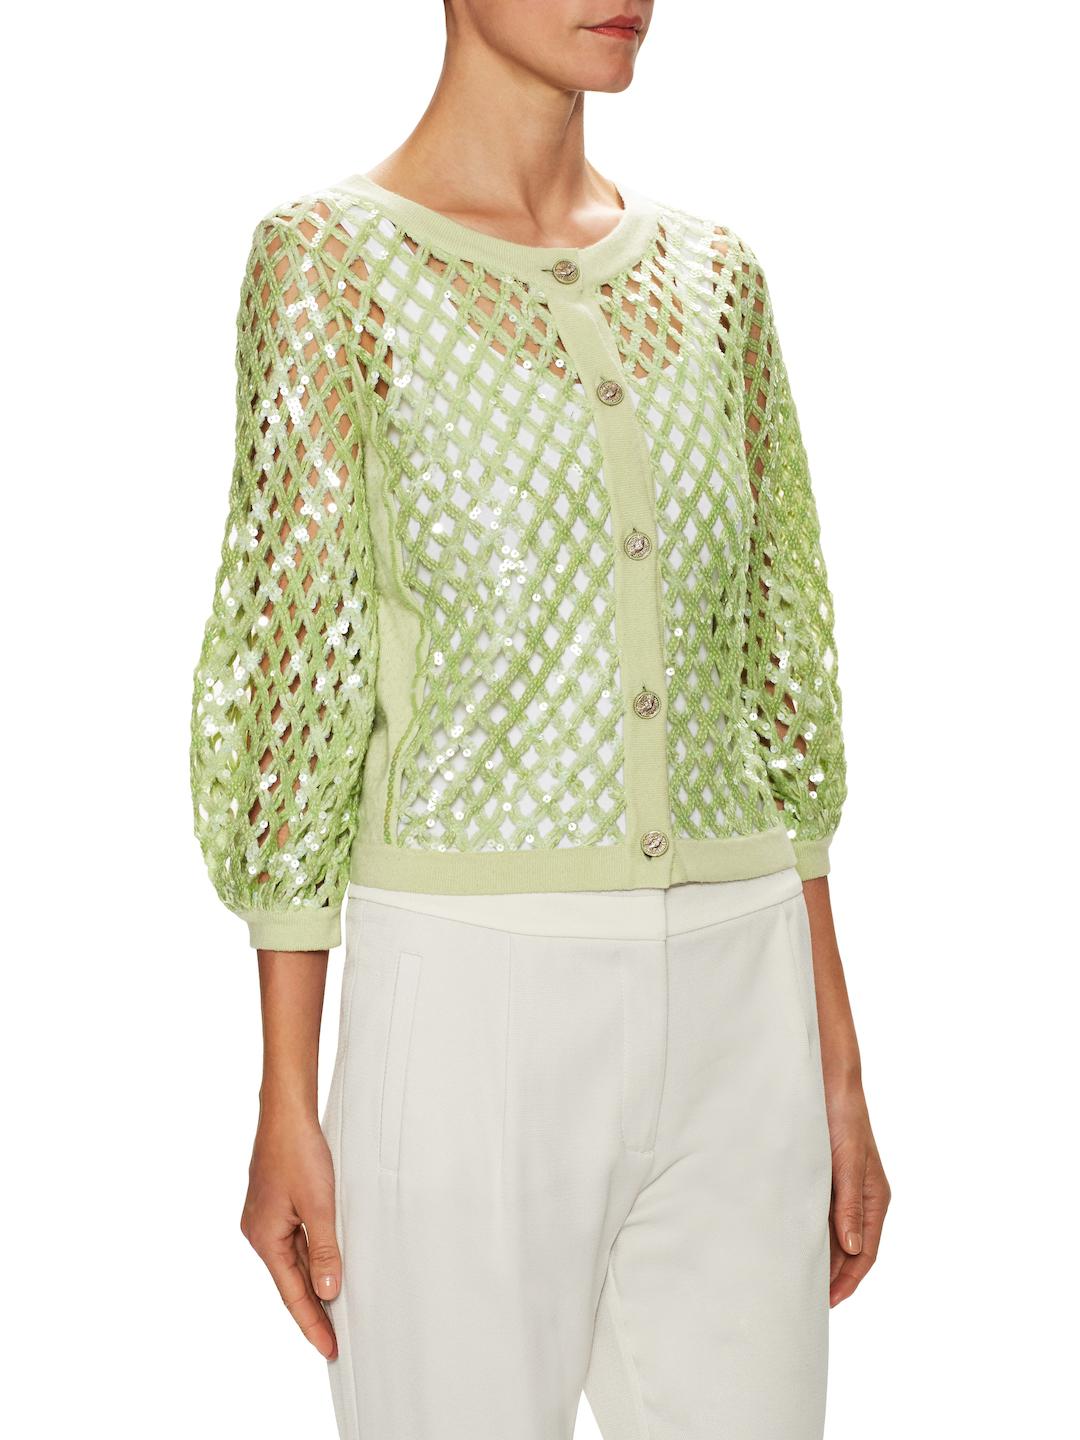 Chanel Vintage Cashmere Sequin Cardigan in Green | Lyst Canada